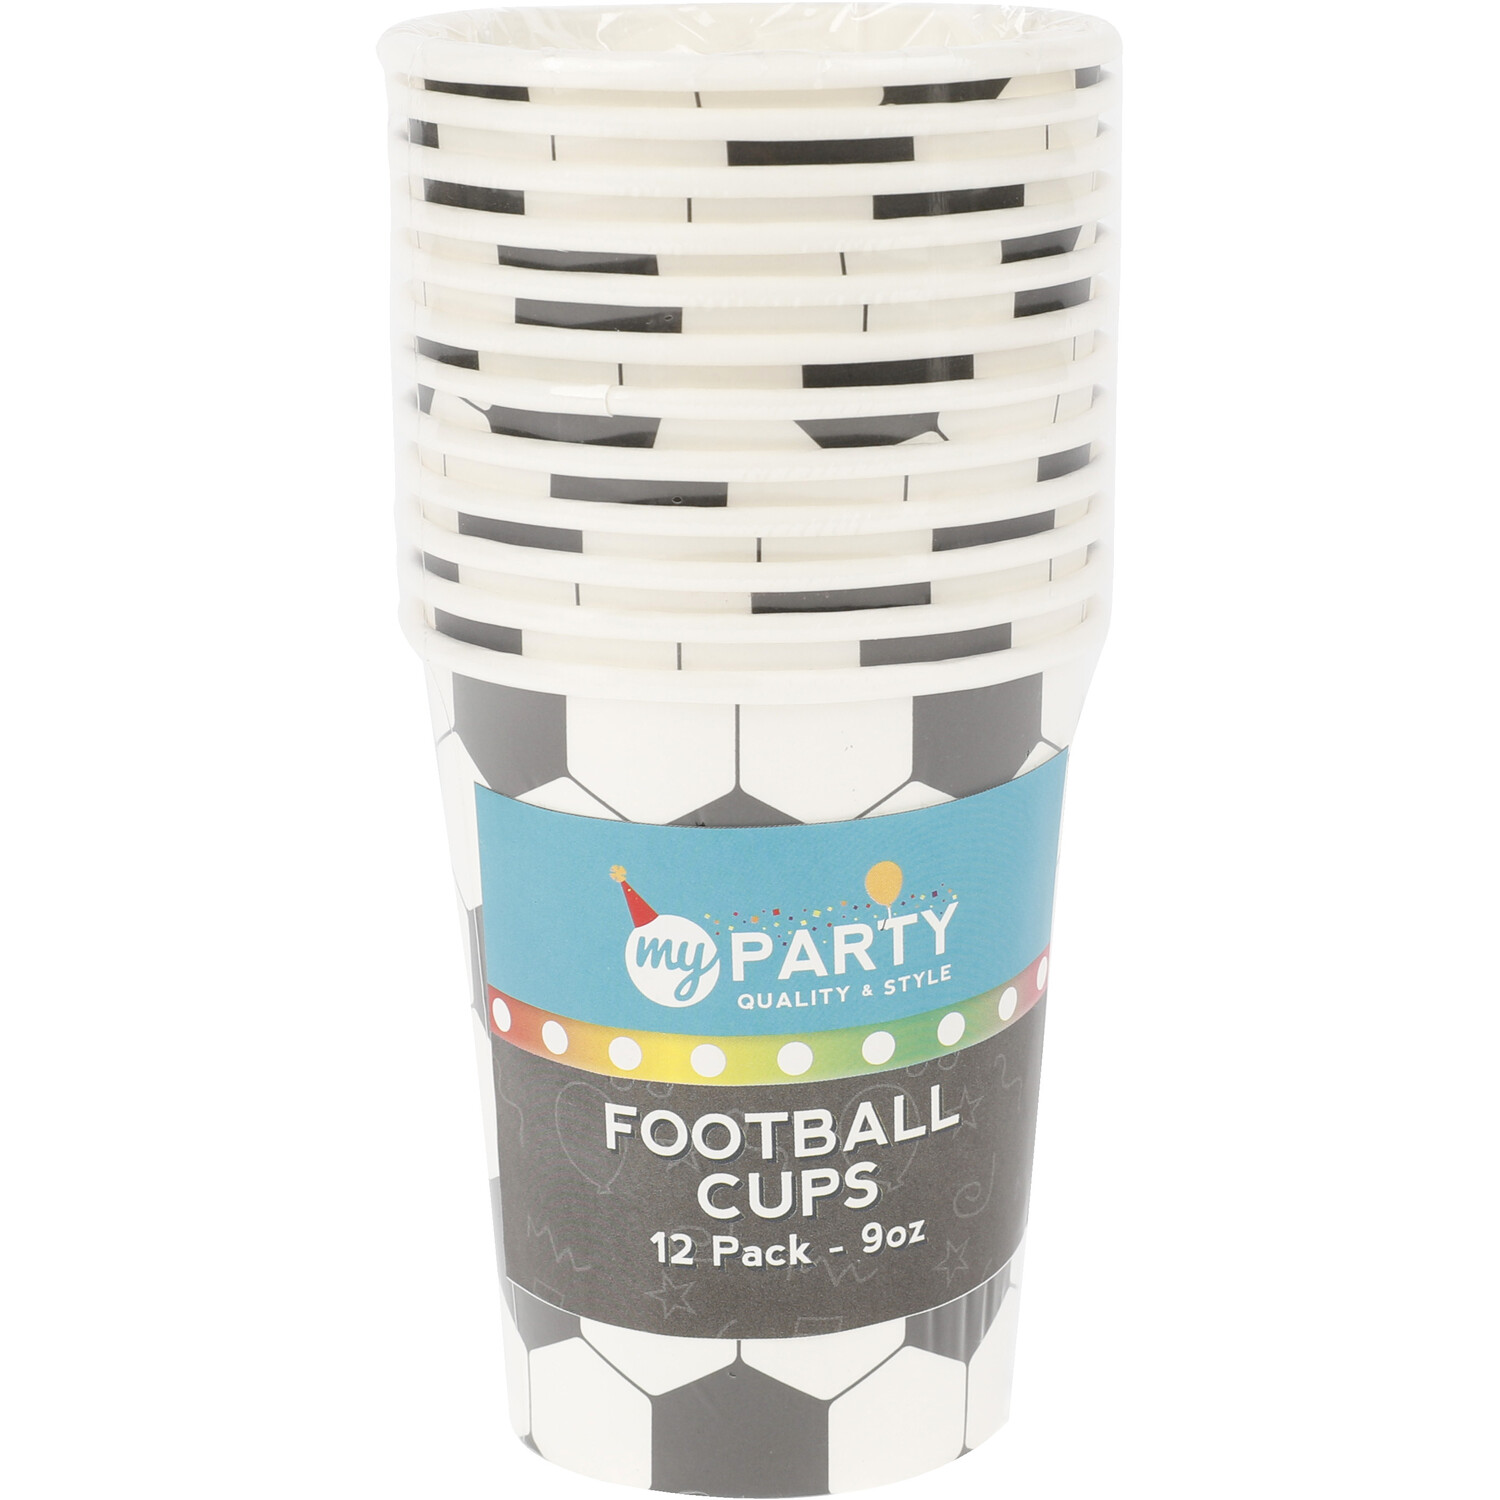 Single My Party Football Cups 12 Pack in Assorted styles Image 2